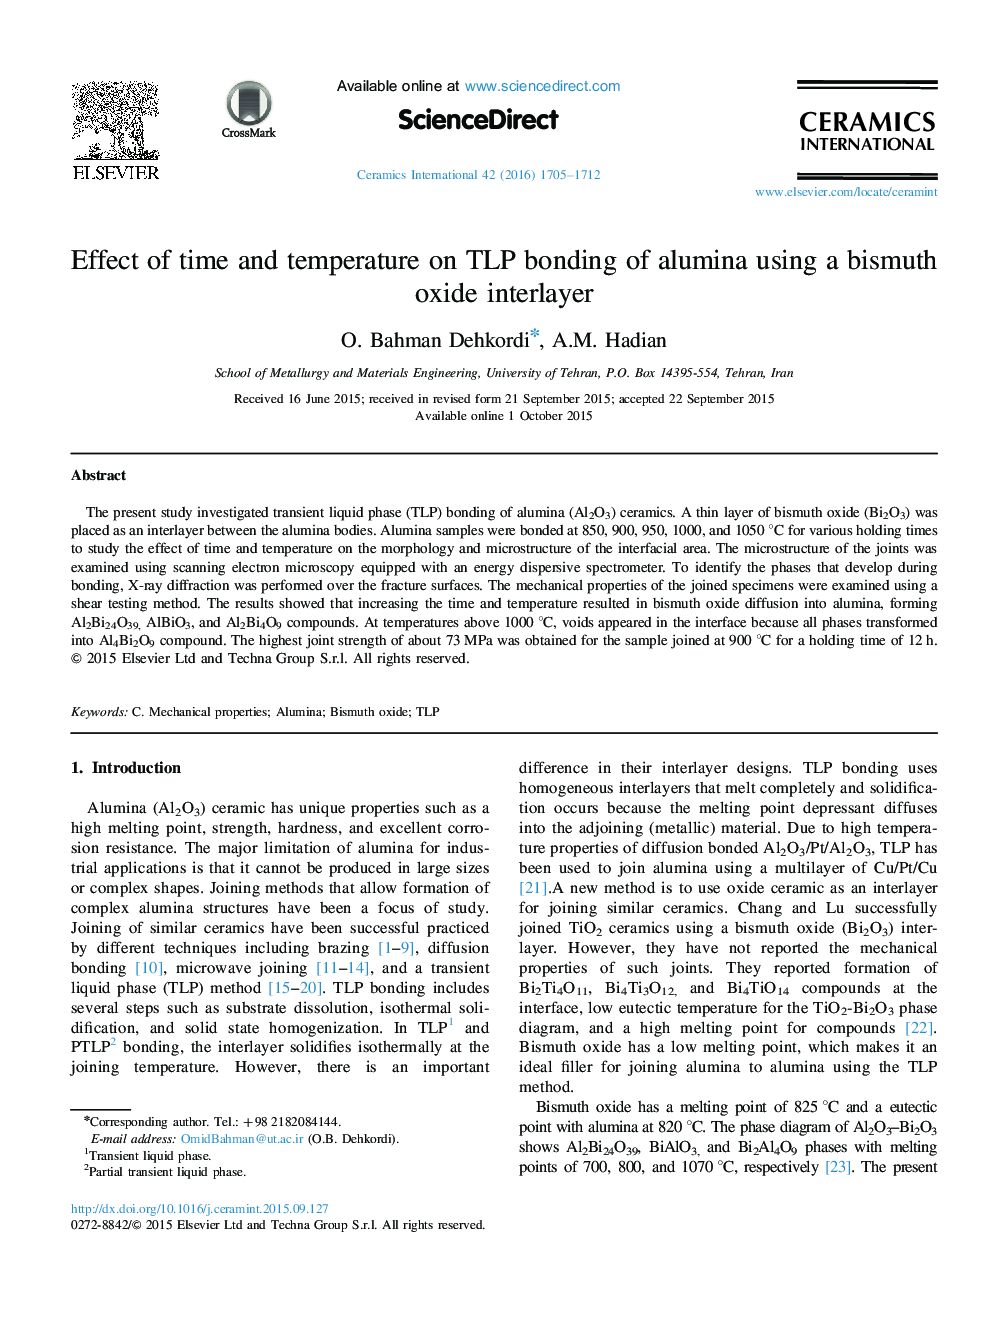 Effect of time and temperature on TLP bonding of alumina using a bismuth oxide interlayer